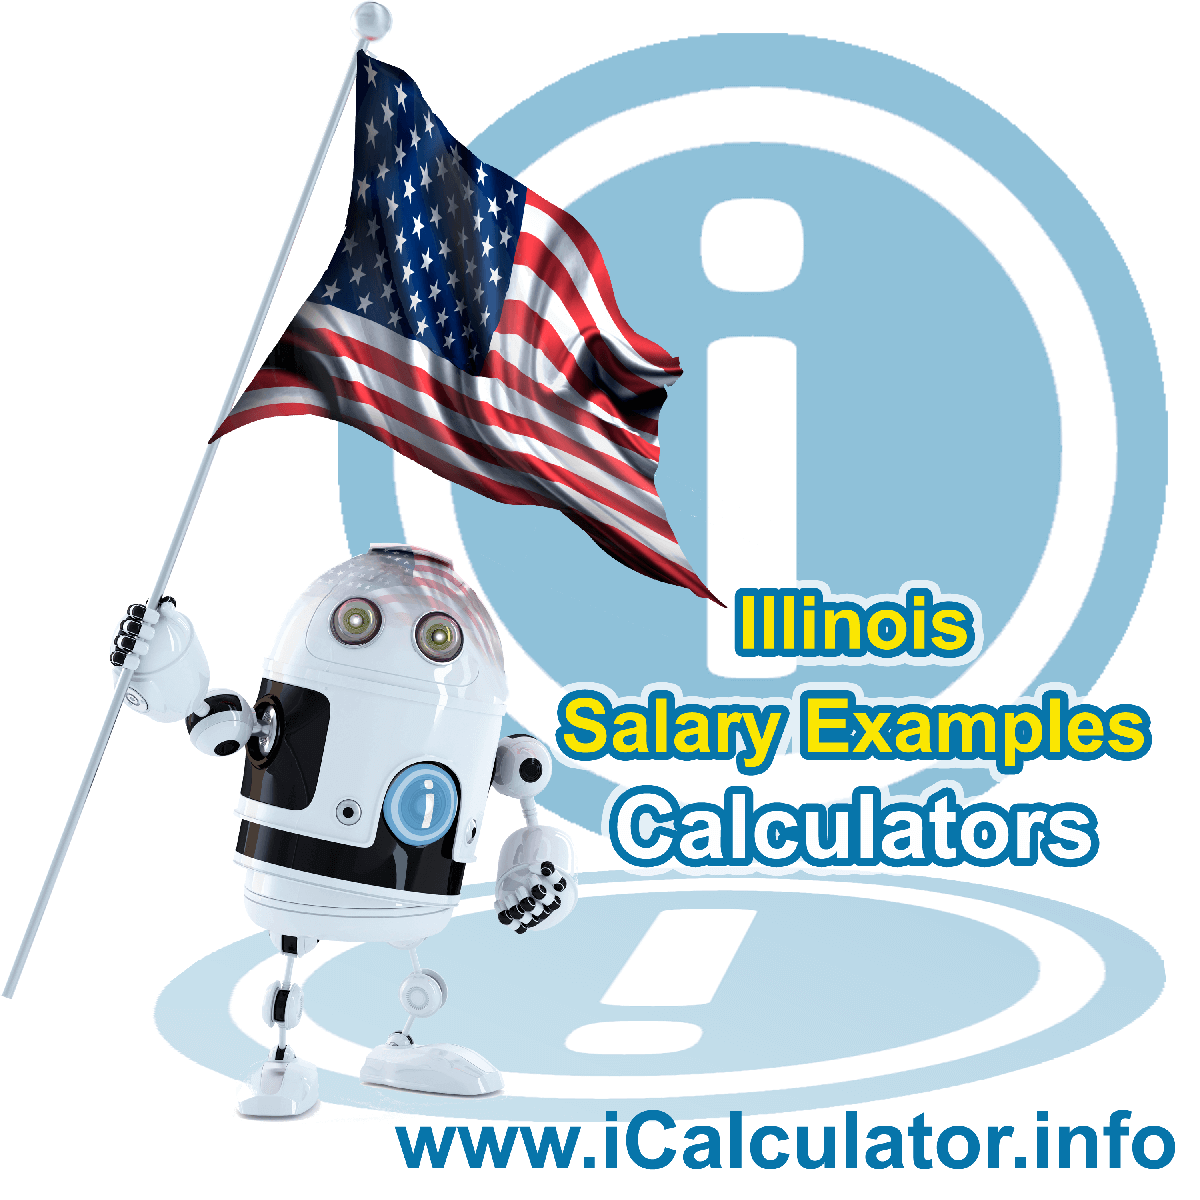 Illinois Salary Example for $ 90,000.00 in 2023 | iCalculator™ | $ 90,000.00 salary example for employee and employer paying Illinois State tincome taxes. Detailed salary after tax calculation including Illinois State Tax, Federal State Tax, Medicare Deductions, Social Security, Capital Gains and other income tax and salary deductions complete with supporting Illinois state tax tables 